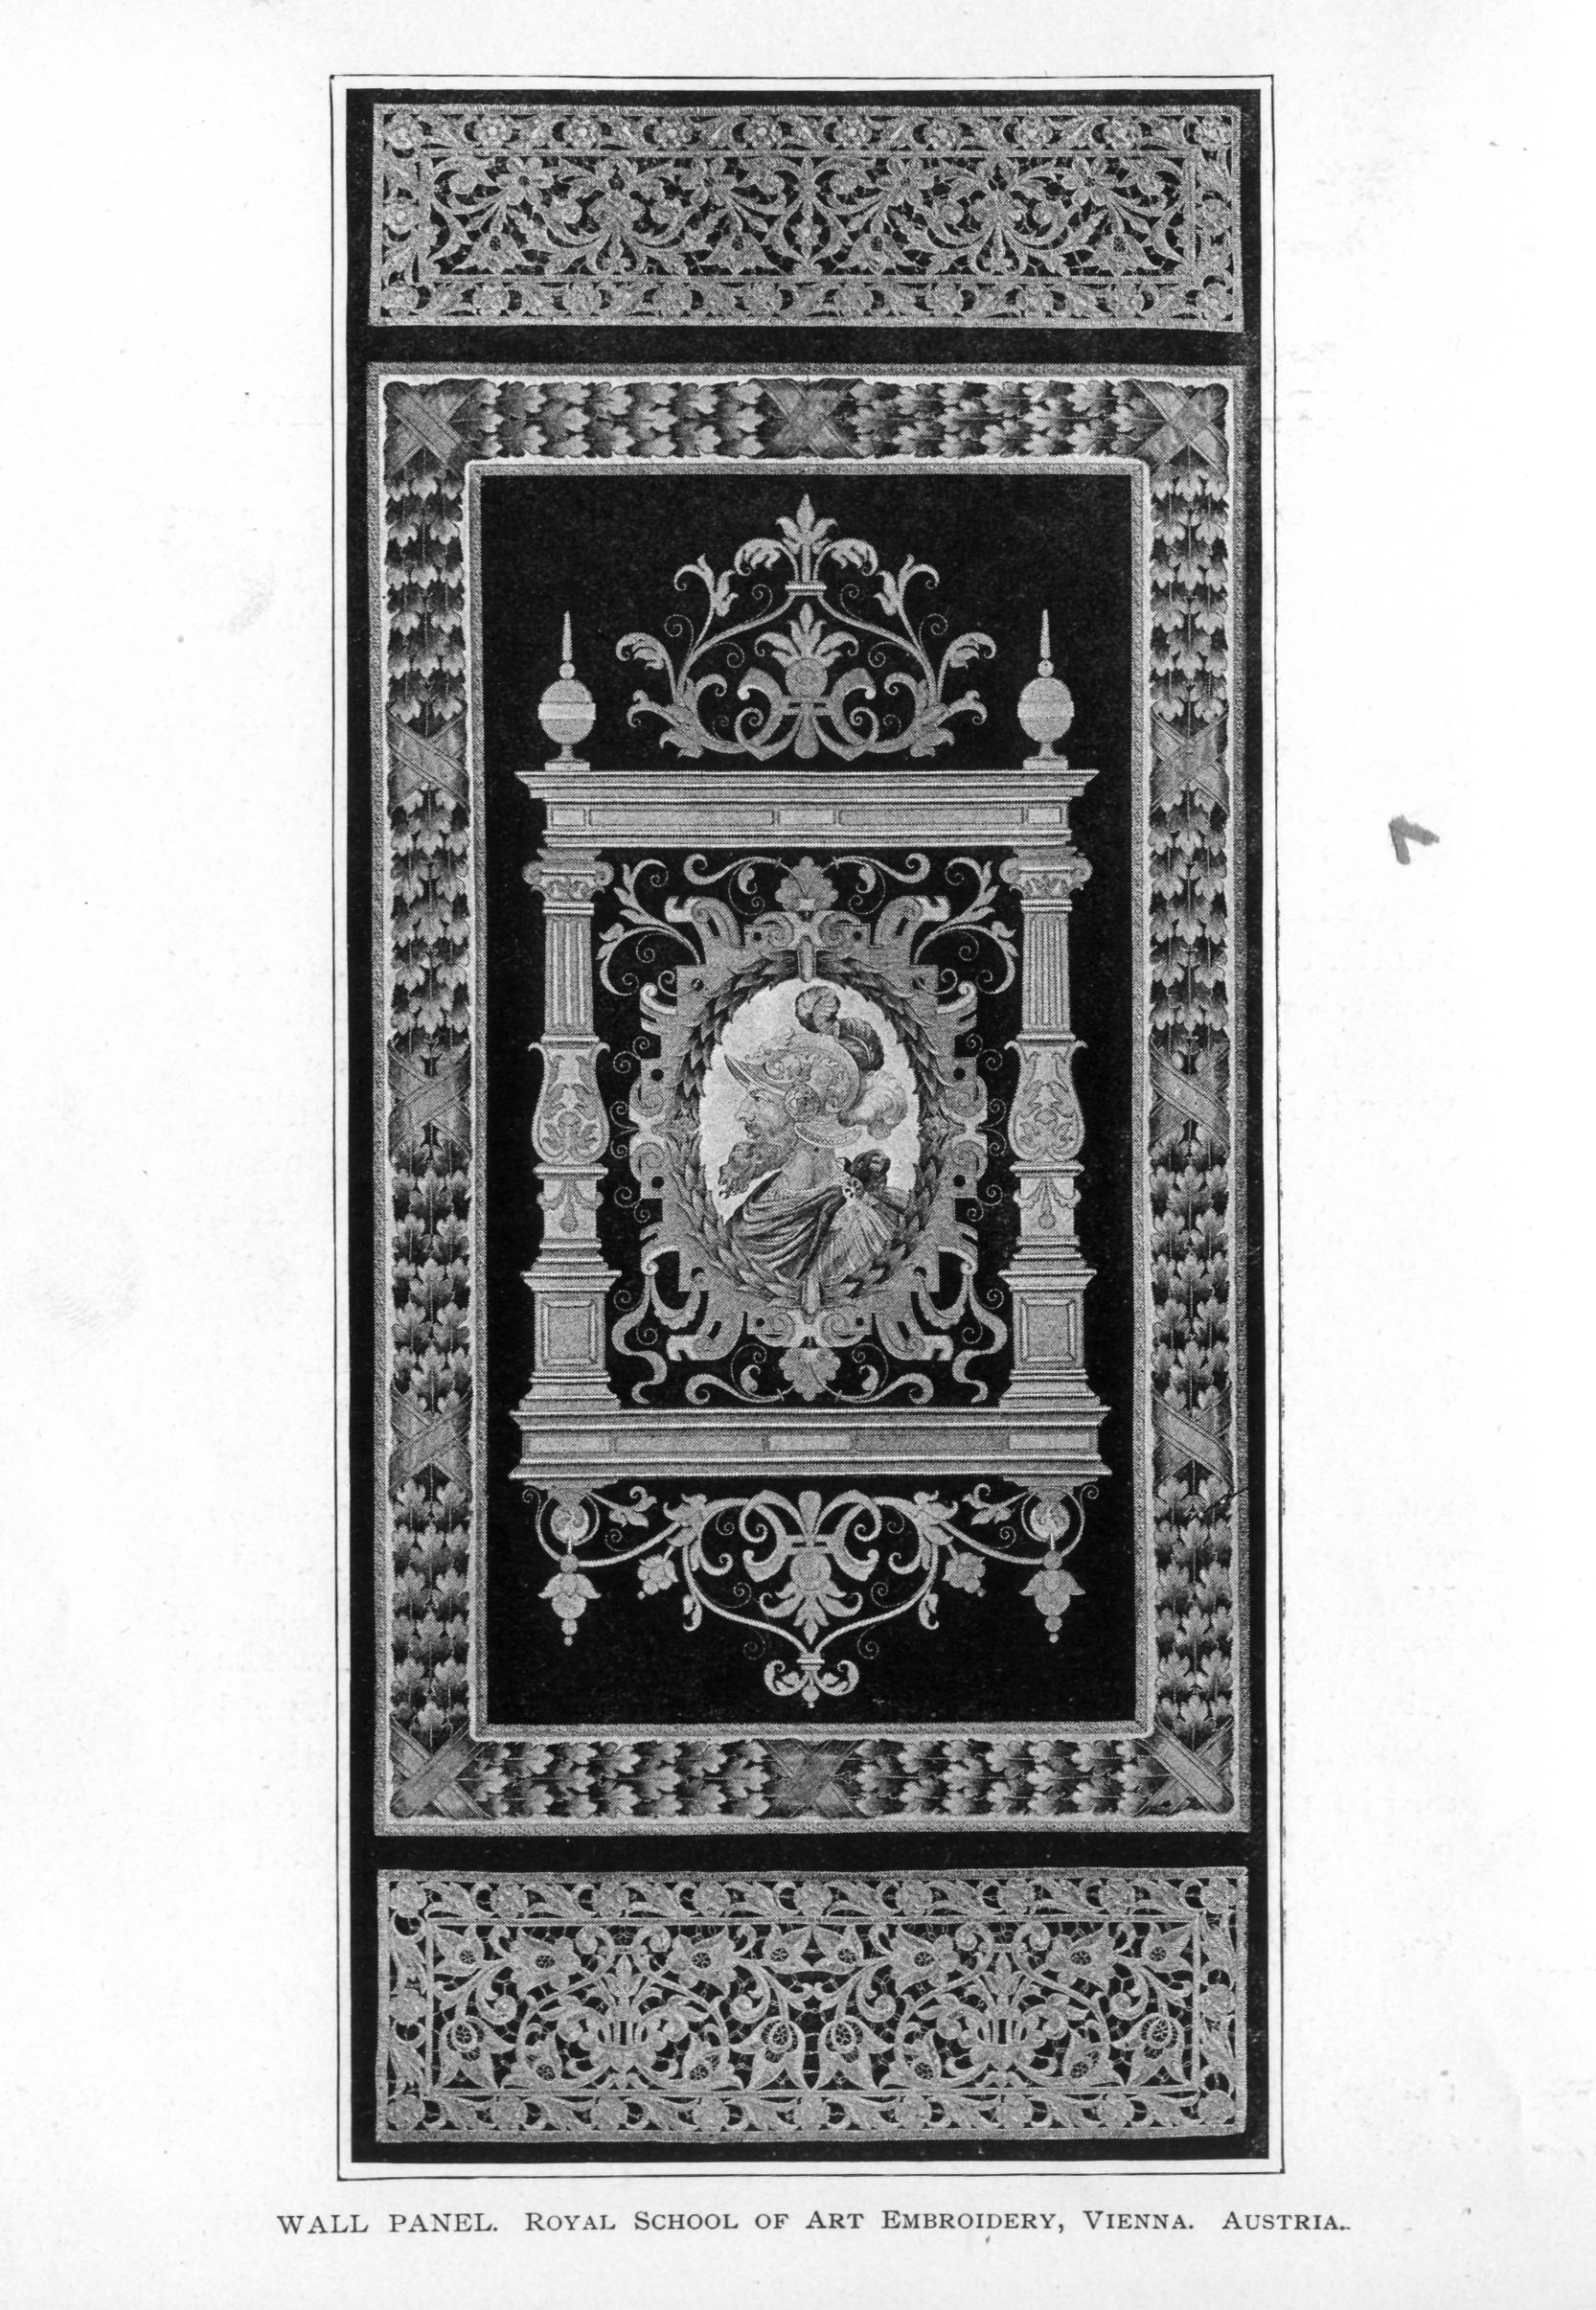 ornate embroidery with portrait of helmeted man in frame with scrollwork and columns, woven border